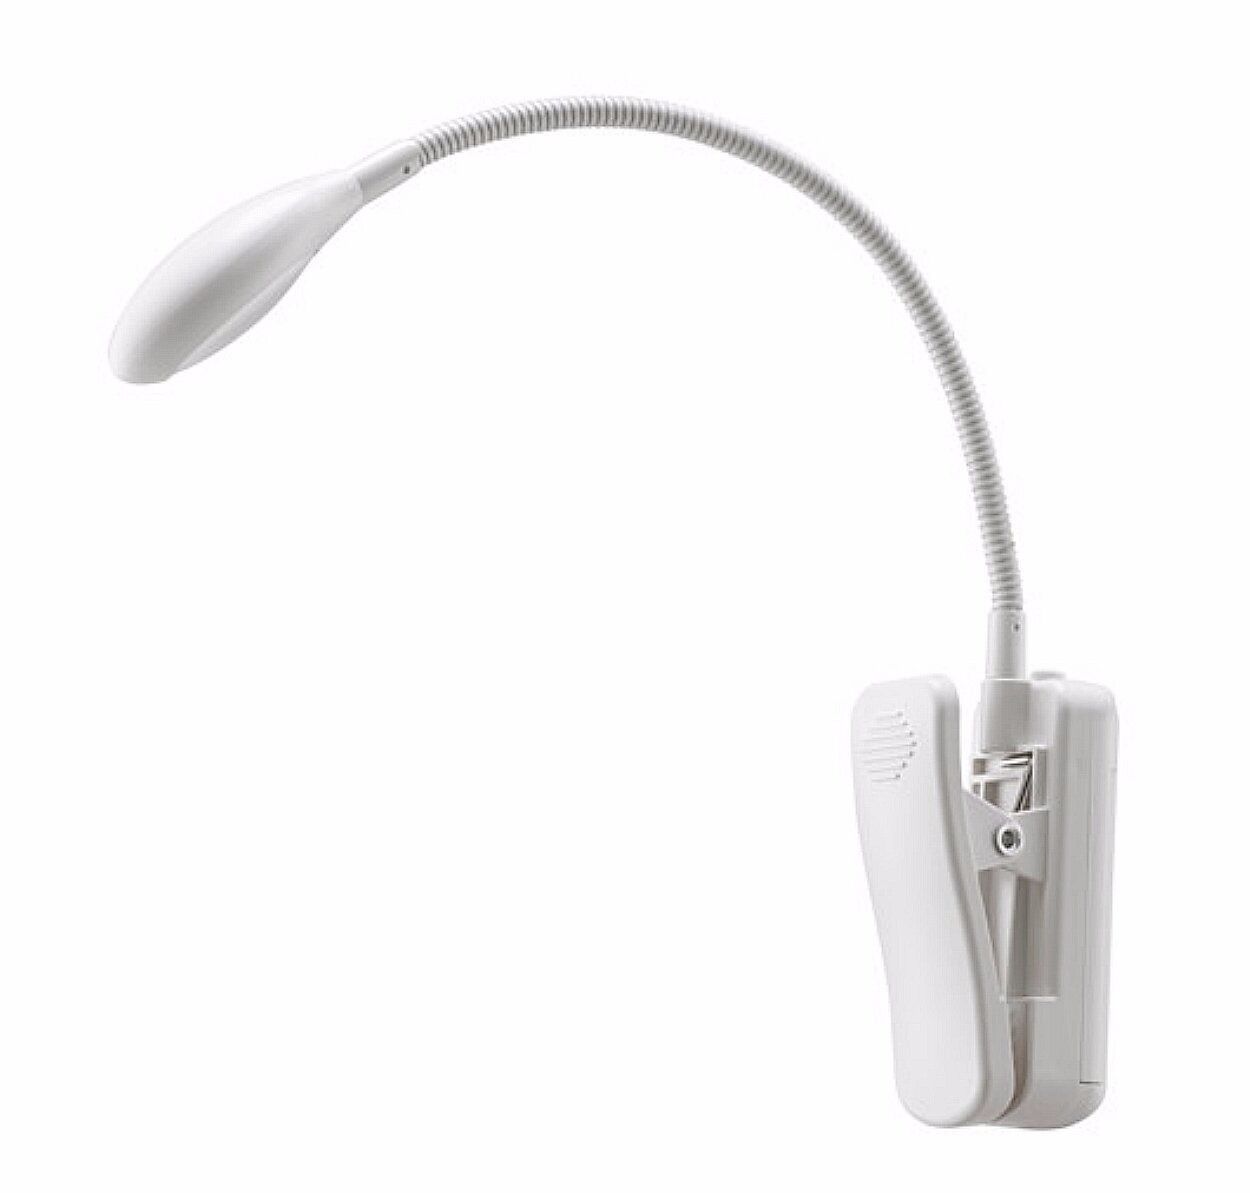 Ikea Clip-on Book Light Adjustable Warm White Diffused Reading Lamp Ebbared